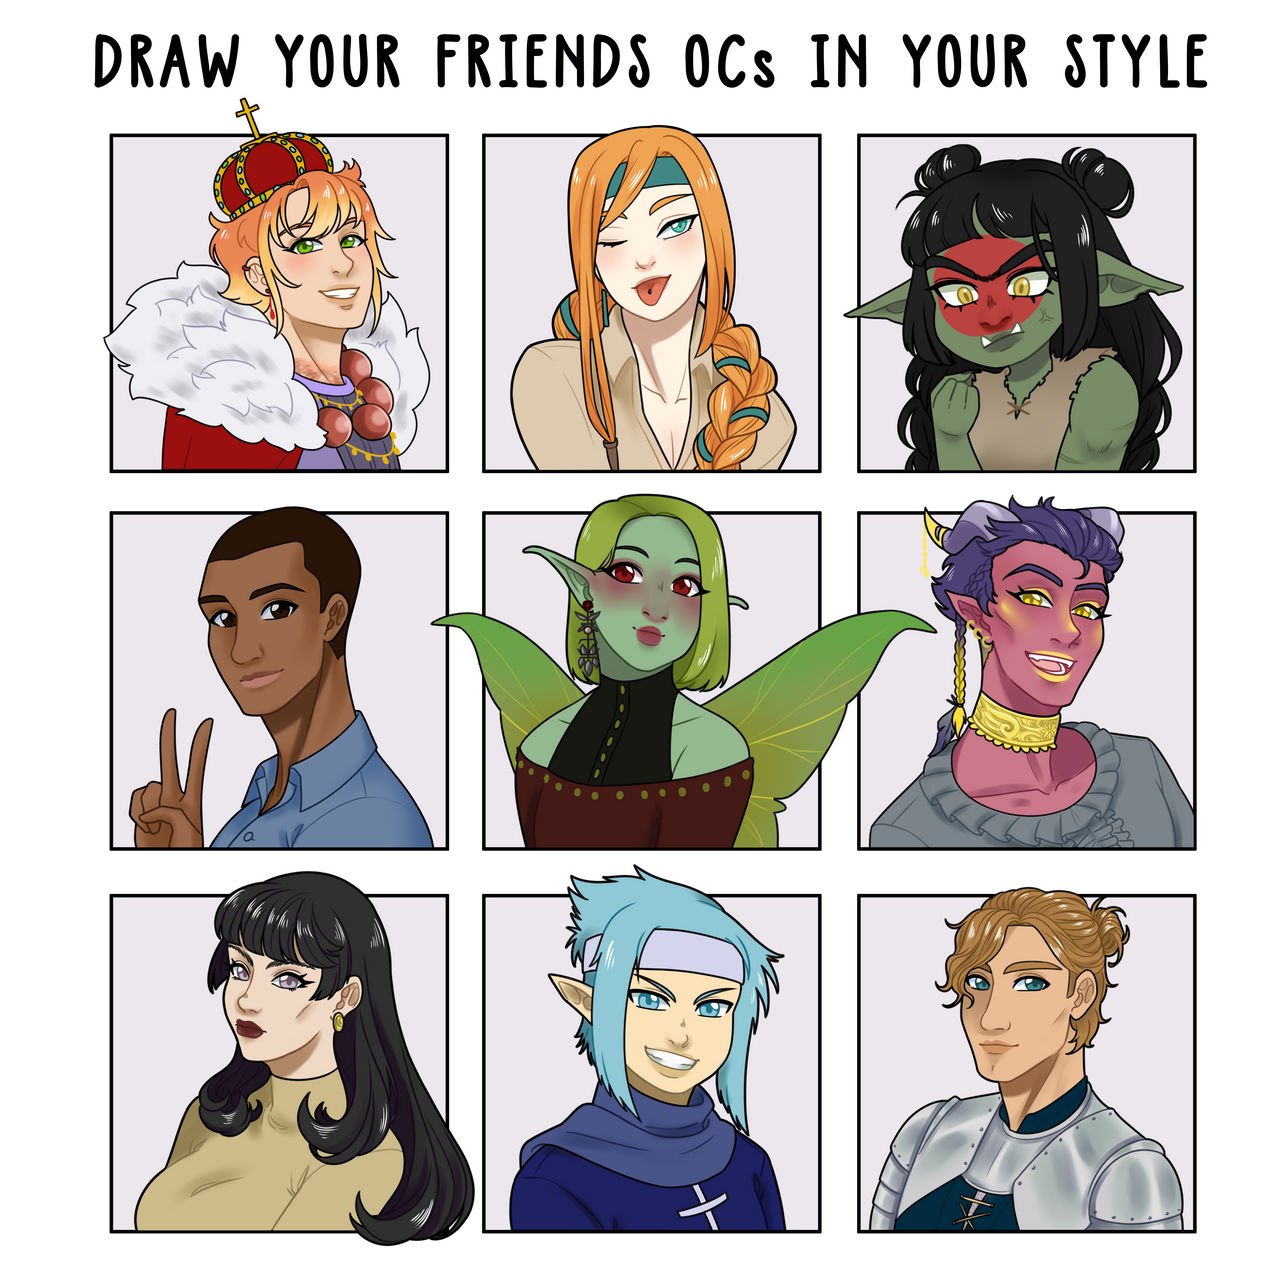 Draw your friends' ocs in your style by Izumi-sen on DeviantArt